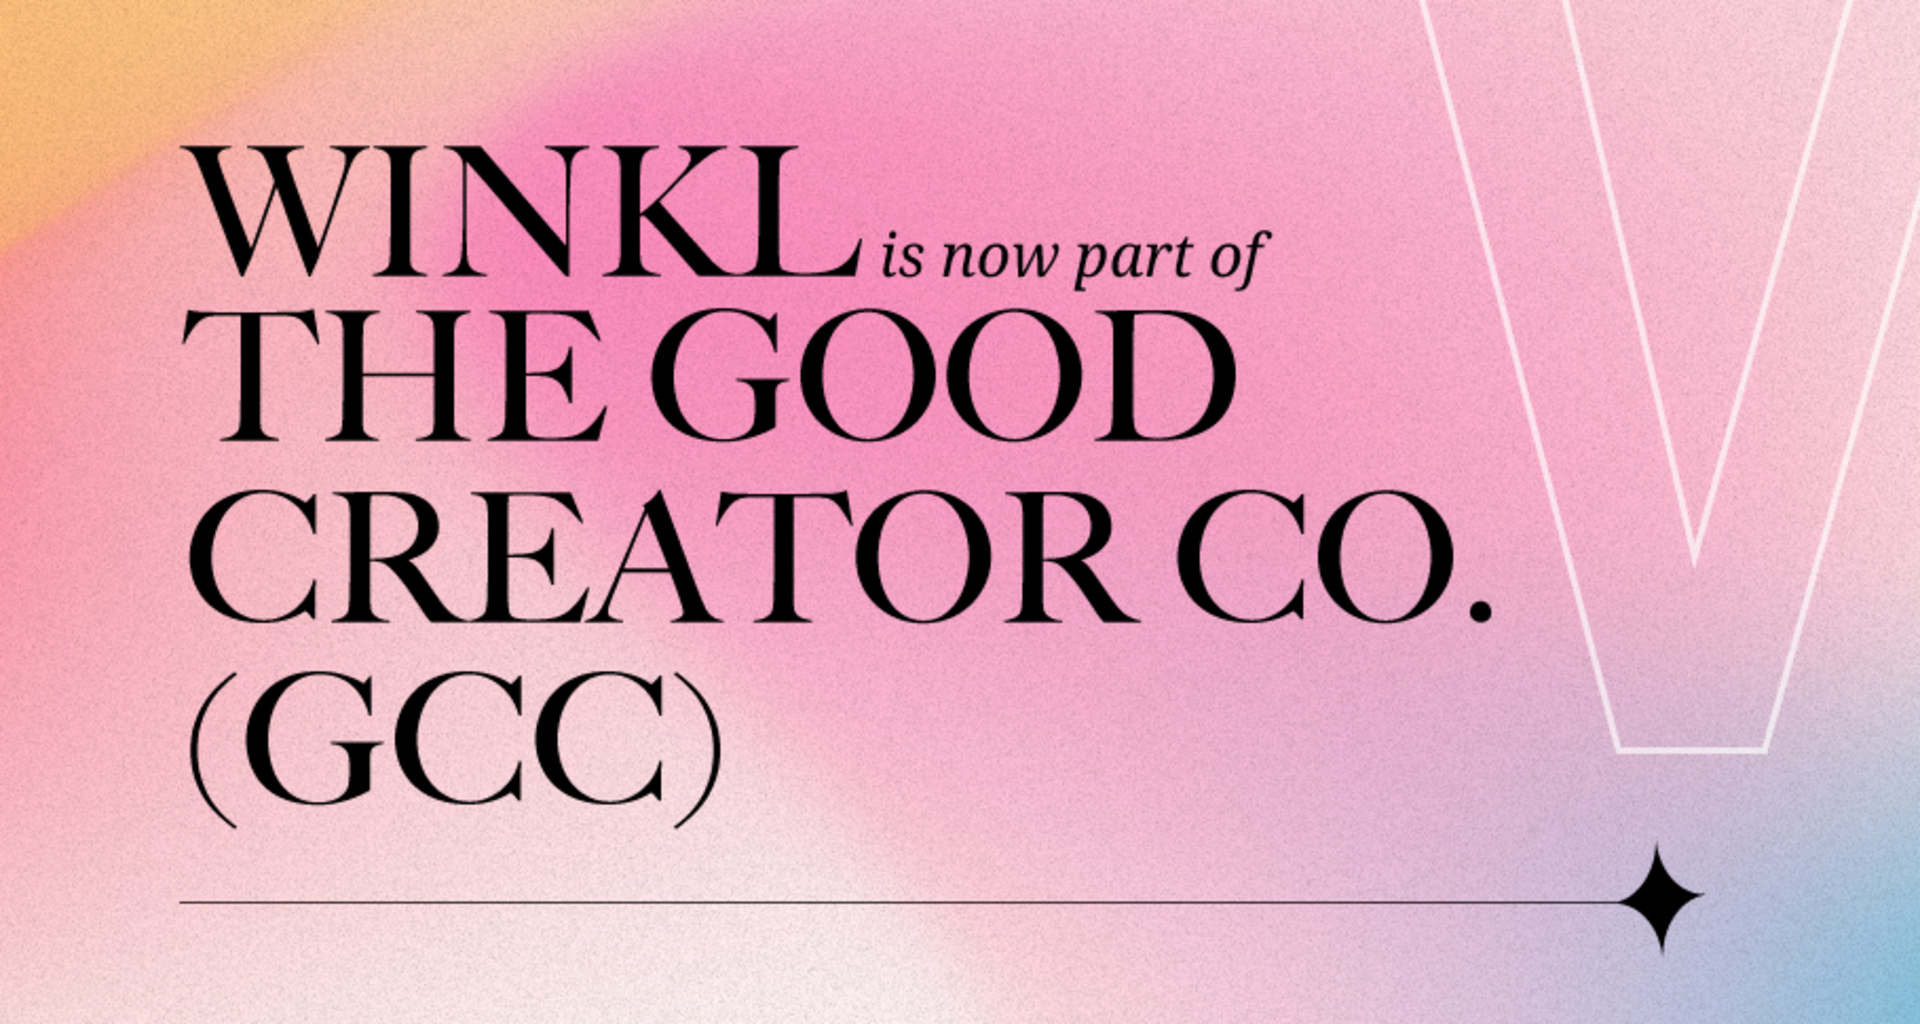 Here’s why Winkl is now a part of The Good Creator Co. - blog by Winkl (An influencer marketing platform)